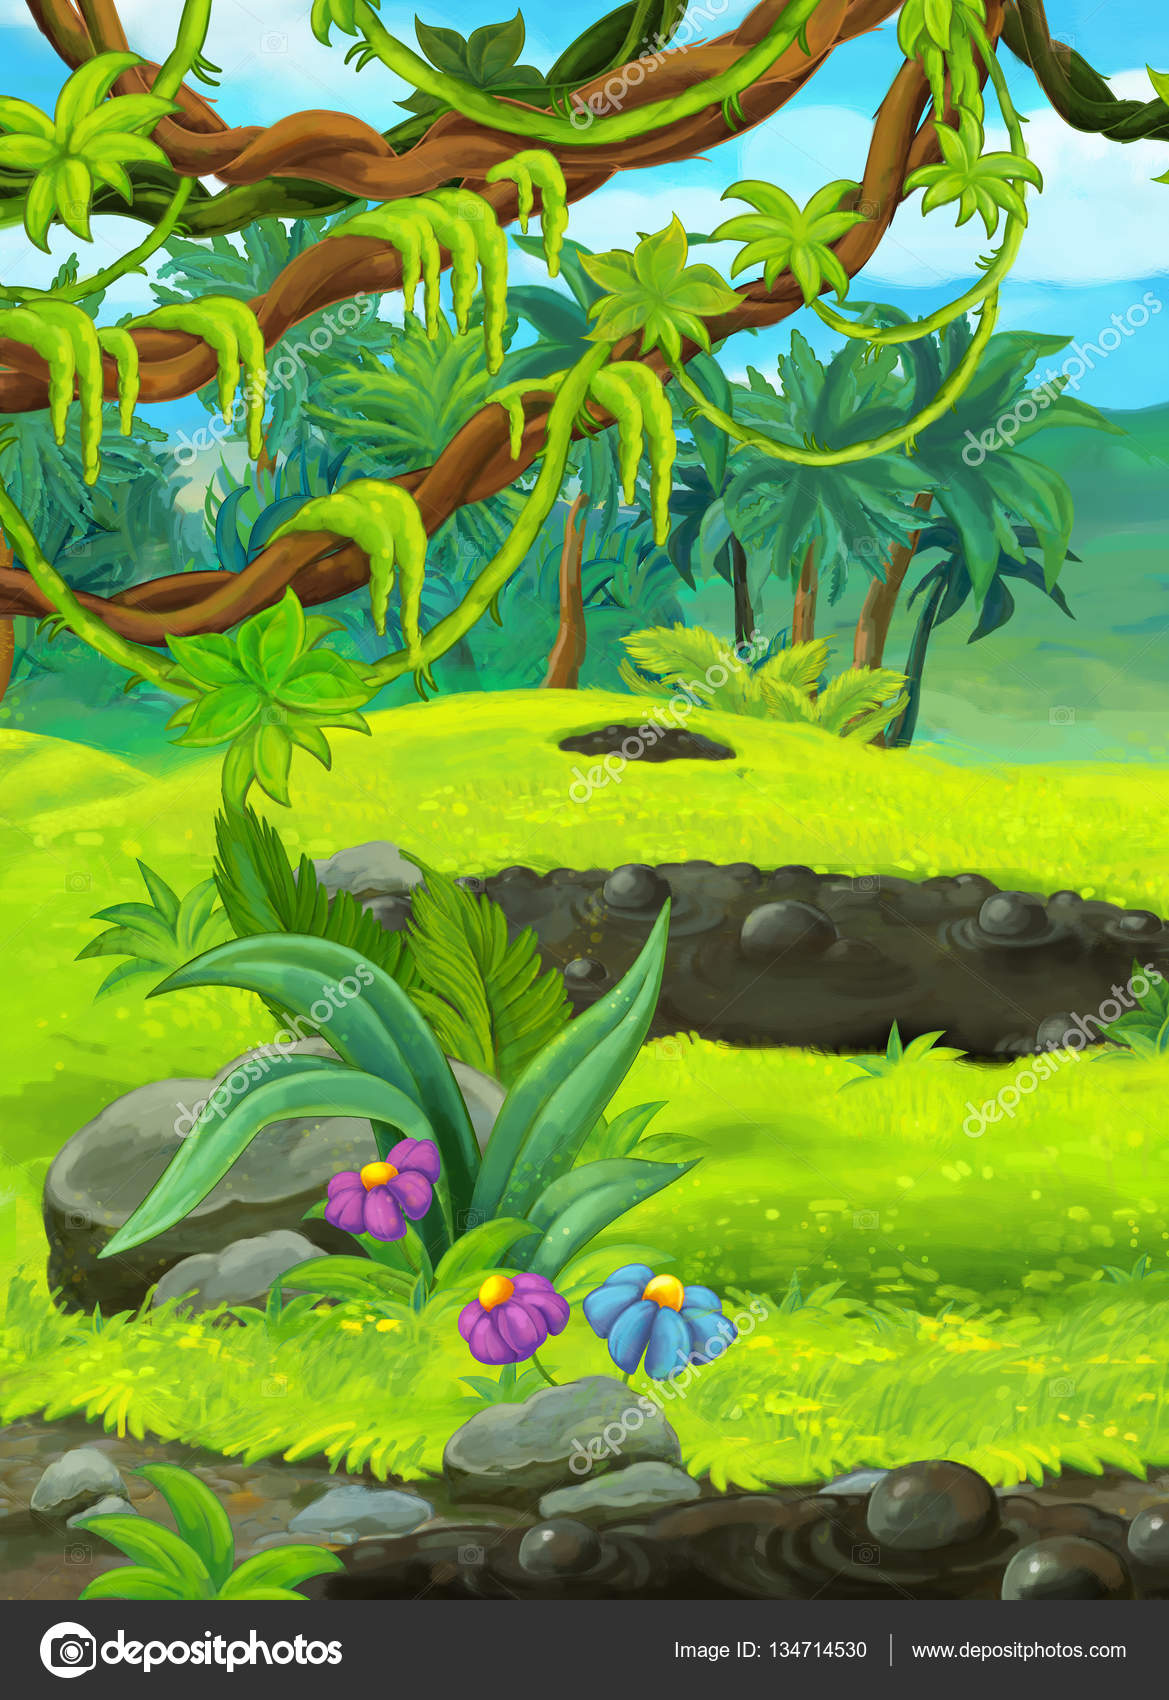 Cartoon nature scene with swamps in the jungle - illustration for children  Stock Photo by ©agaes8080 134714530